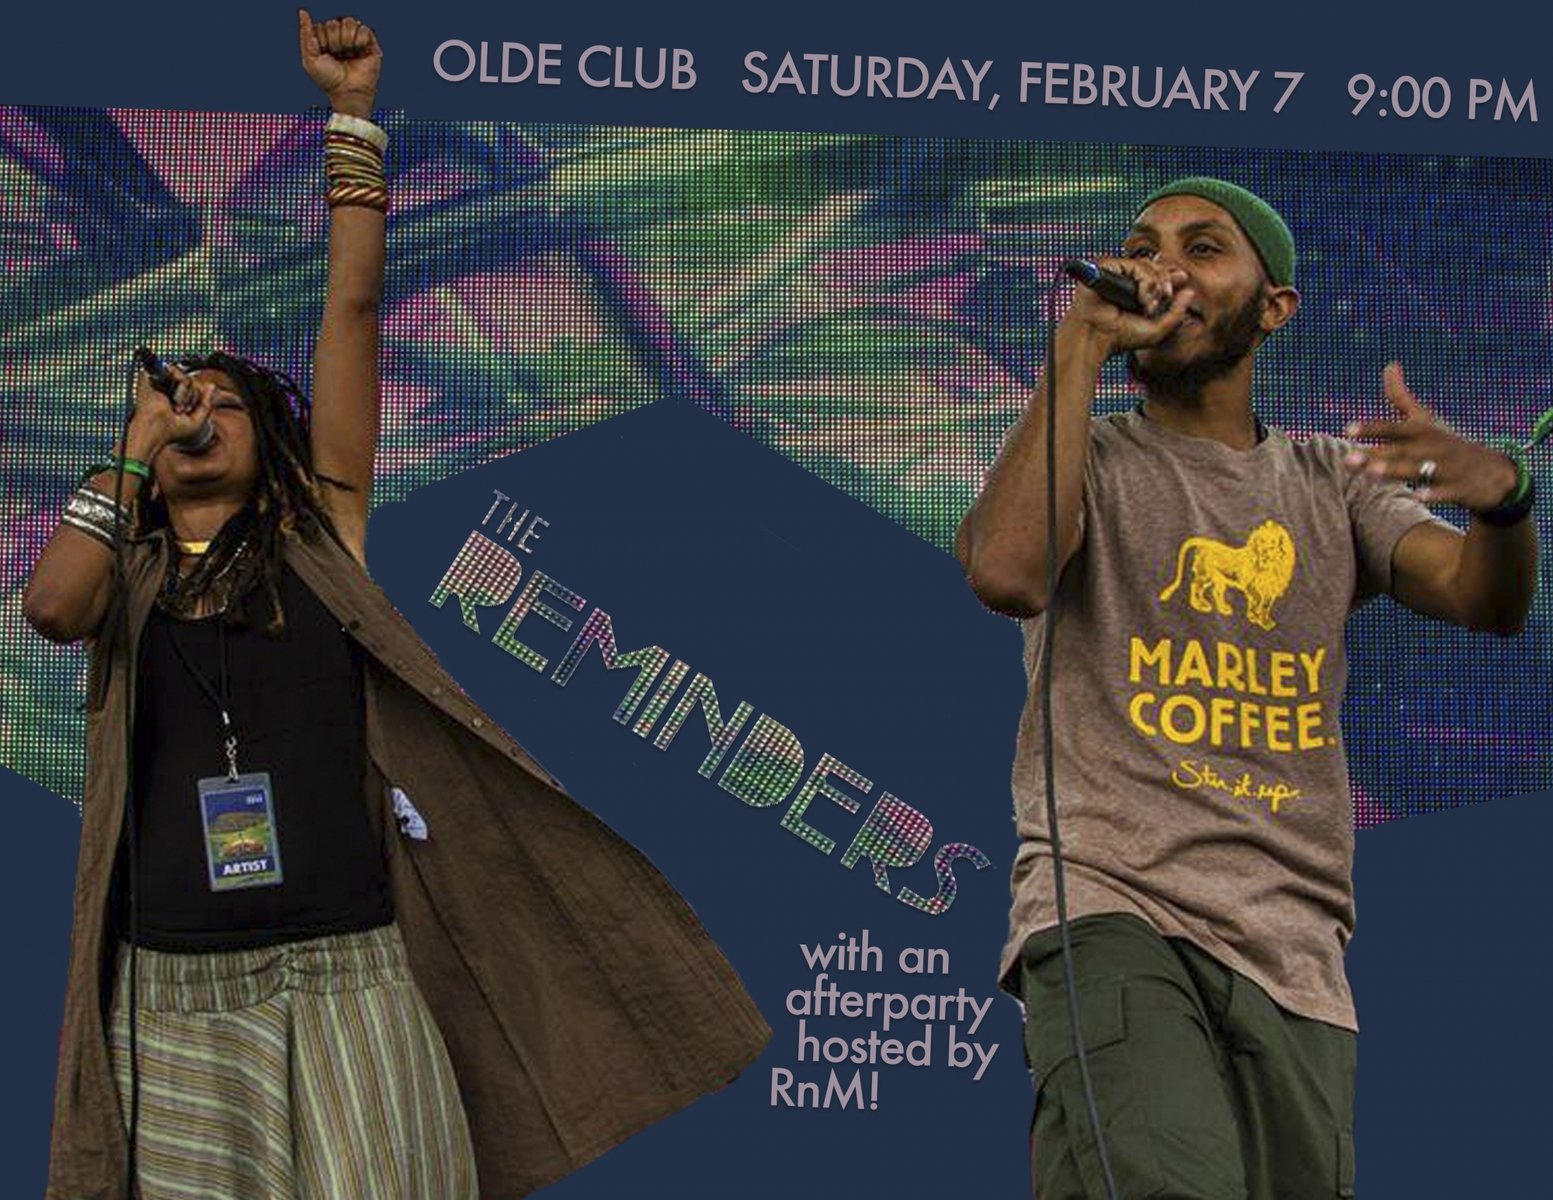 Advertisement for the Reminders performing in Olde Club